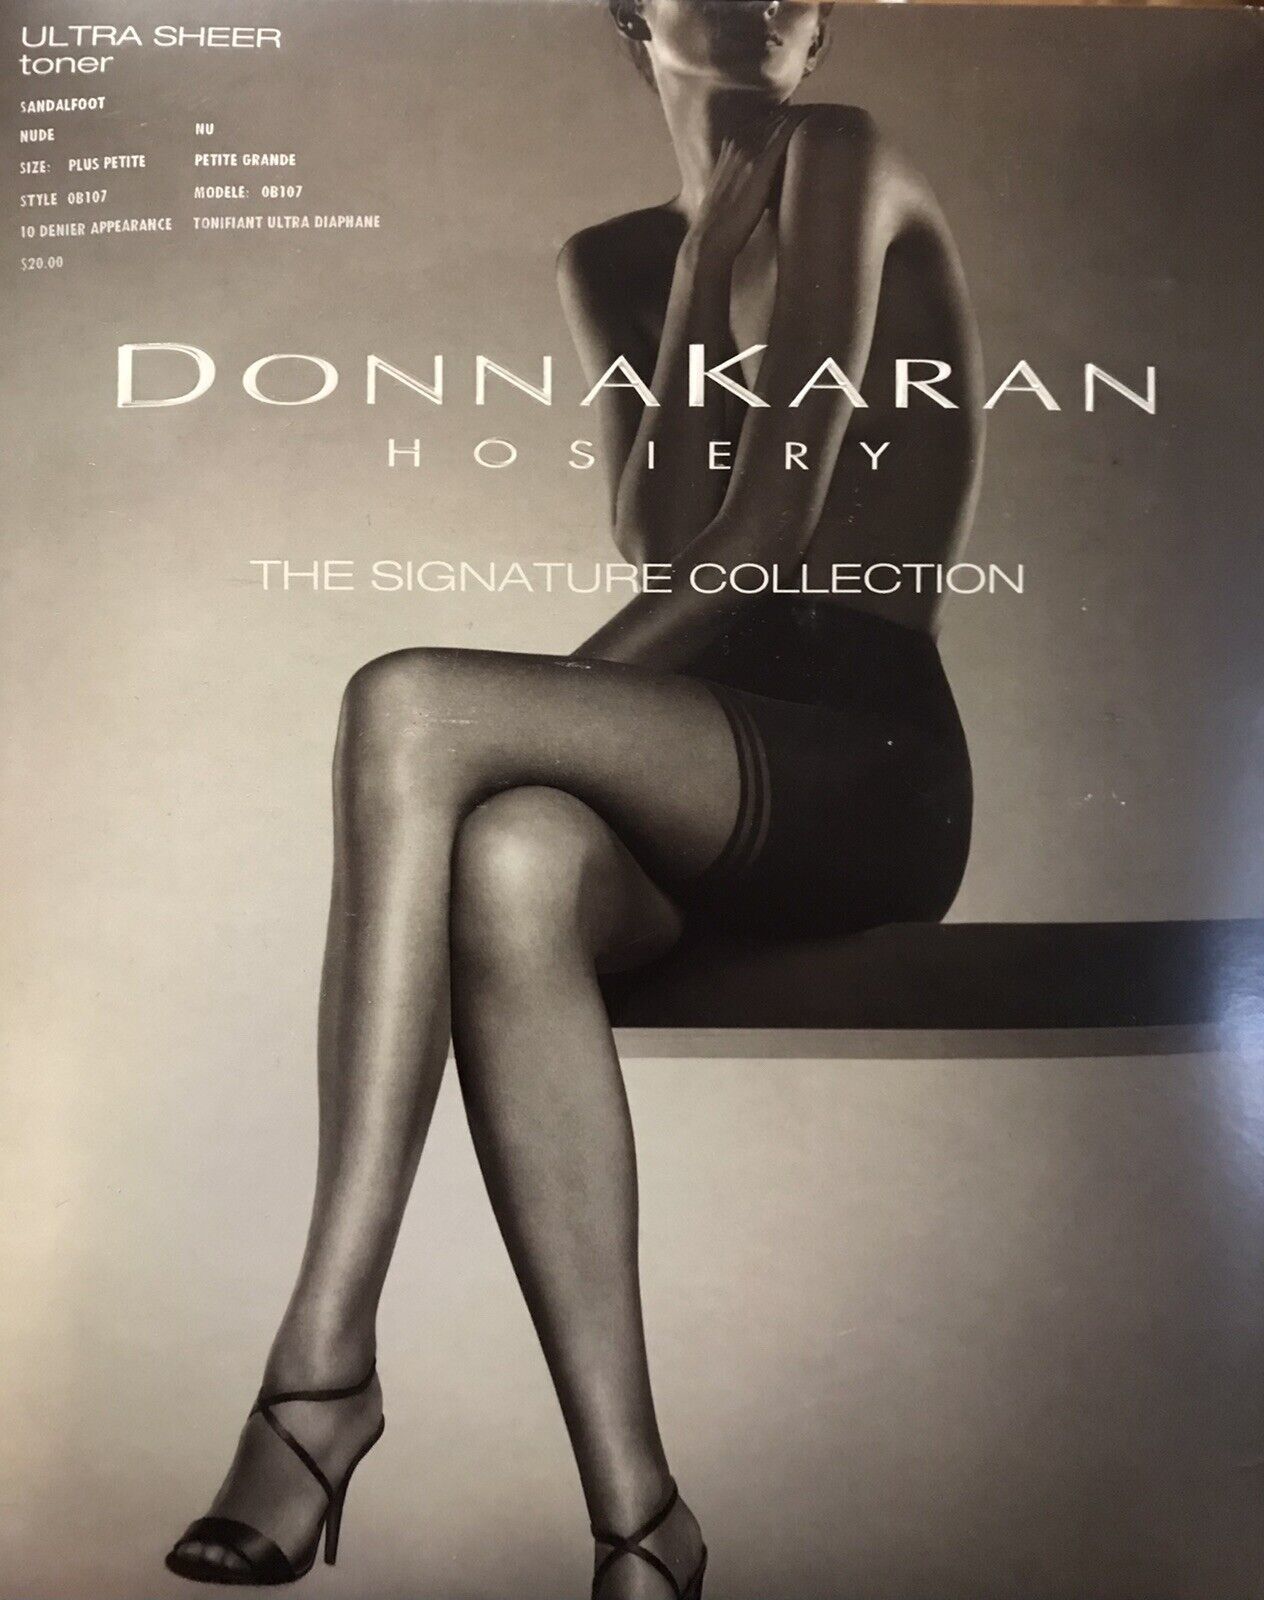 Primary image for Donna Karan Hosiery The Signature Collection Ultra Sheer Toner Plus Petite Nude